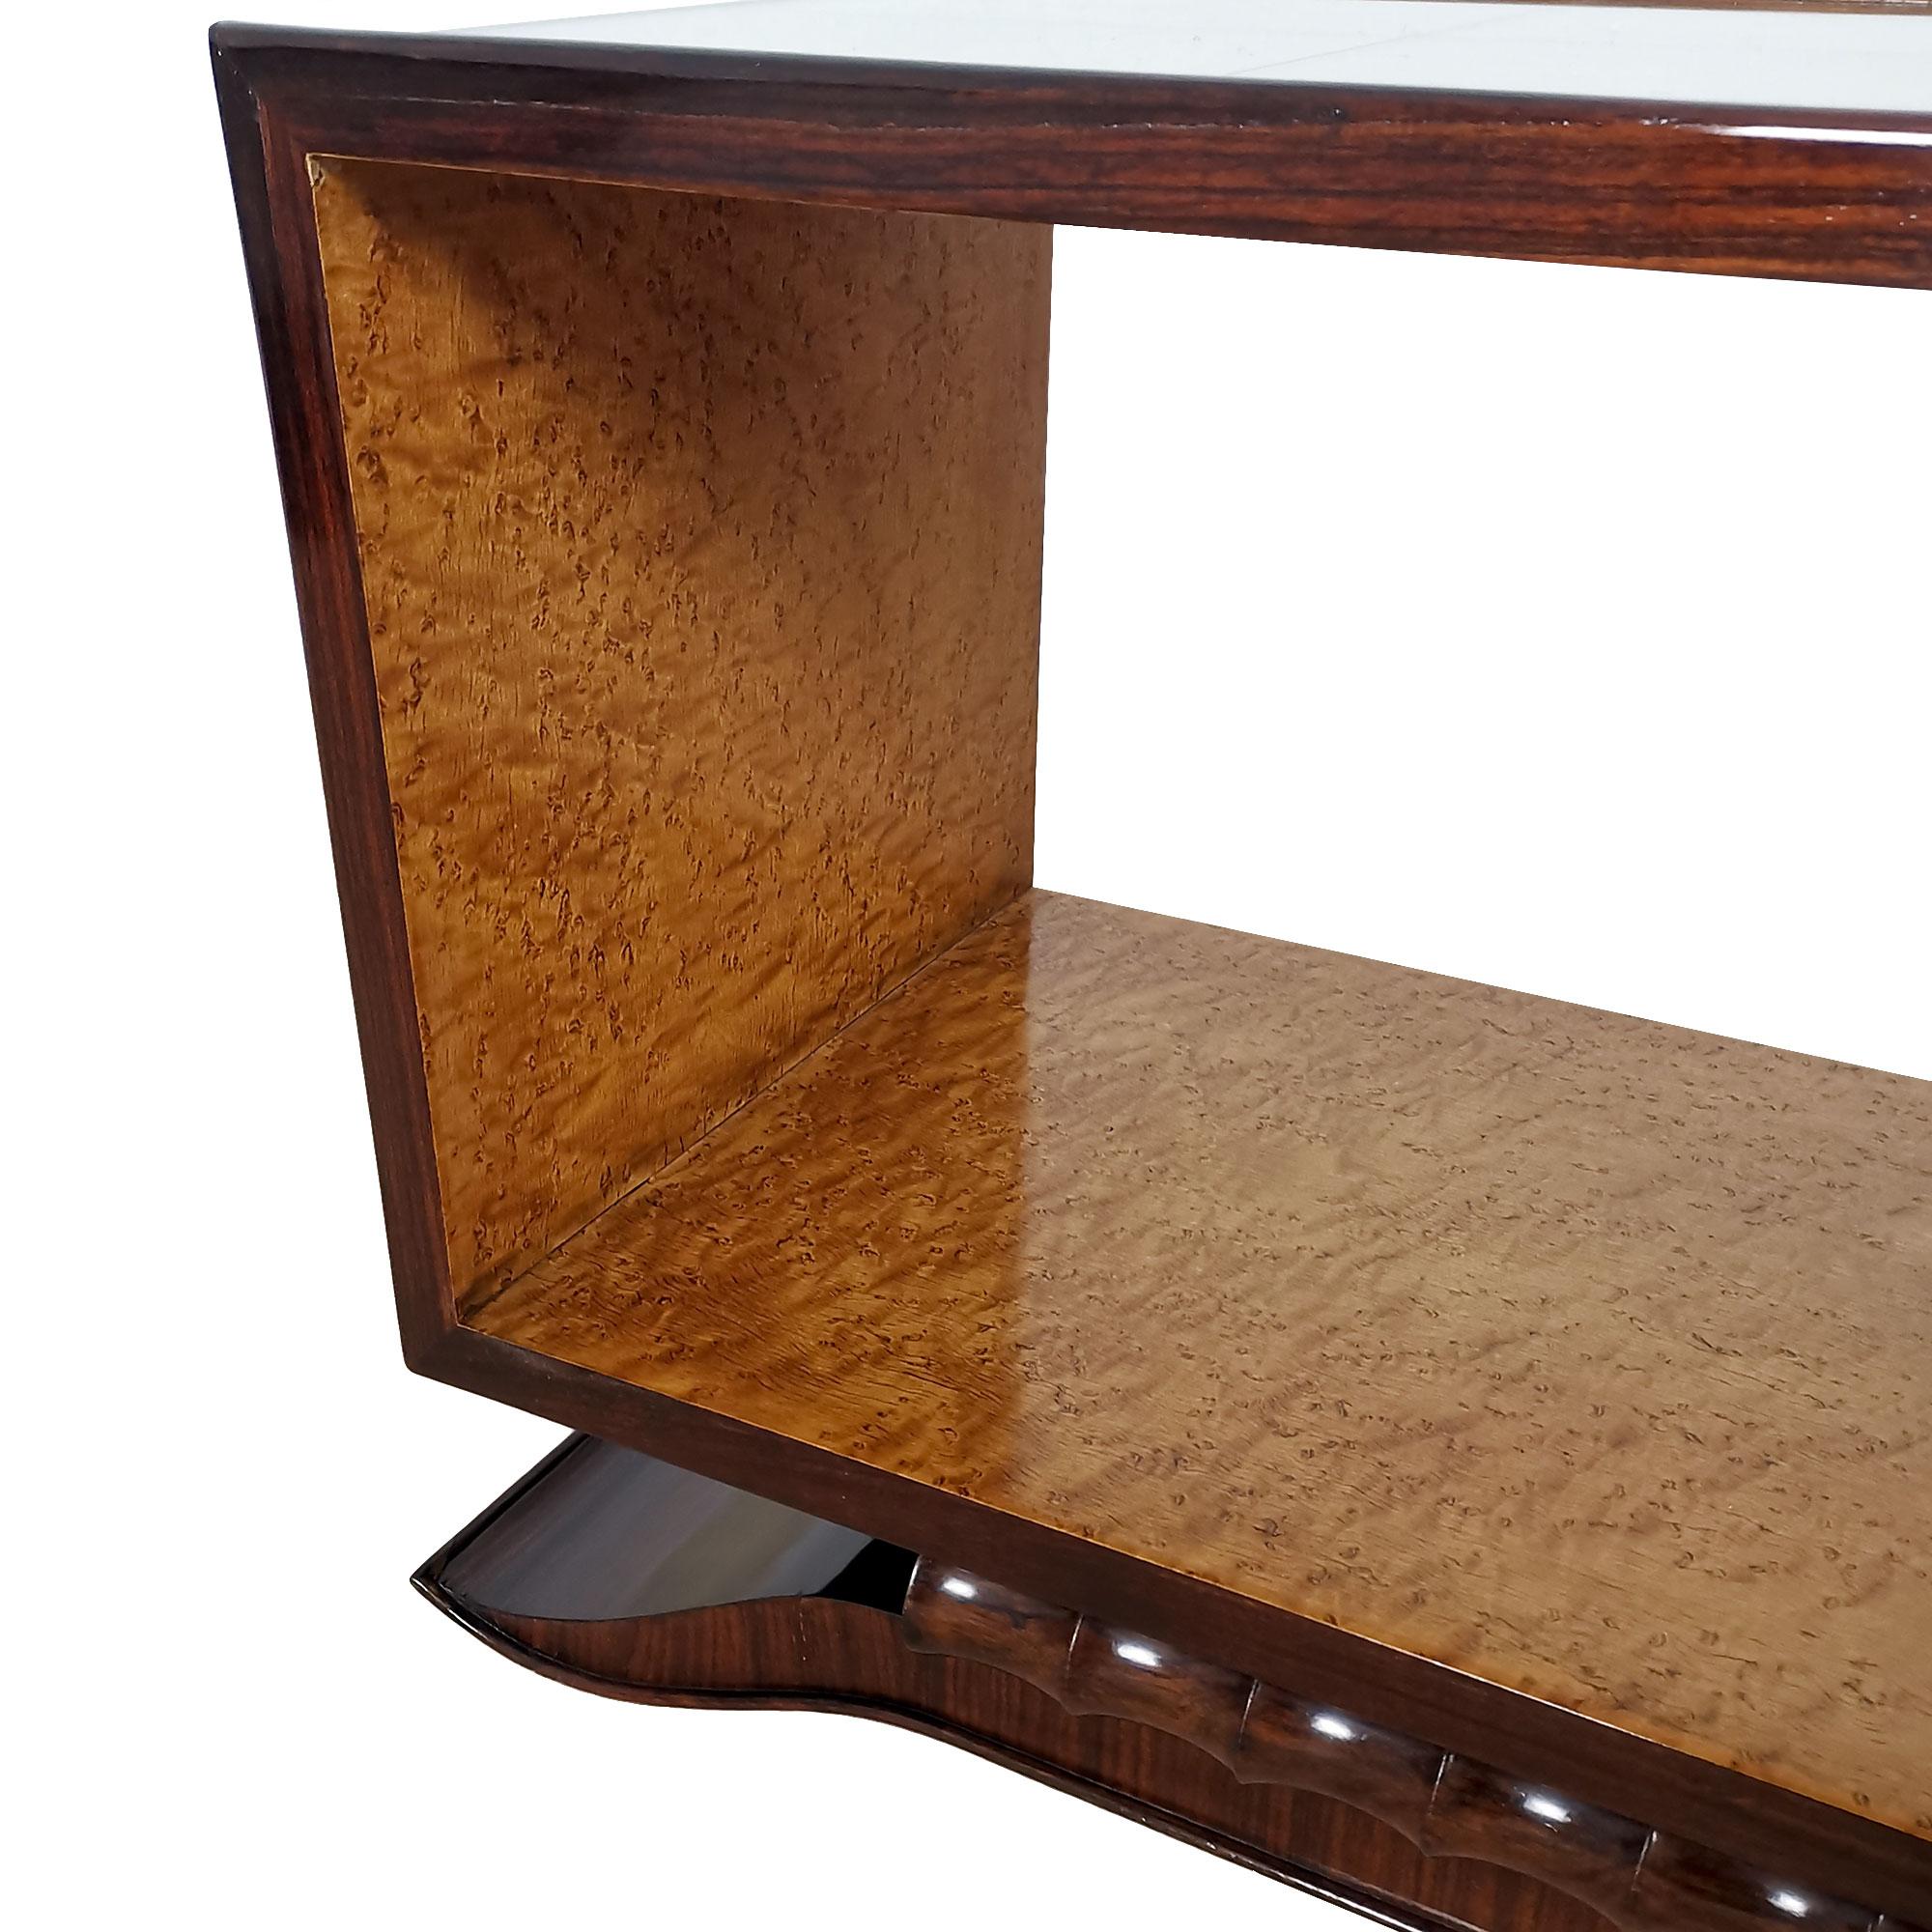 Brass 1930's Art Deco Cubist Coffee Table, Birdseye Maple, Mahogany, Mirrors - Italy For Sale